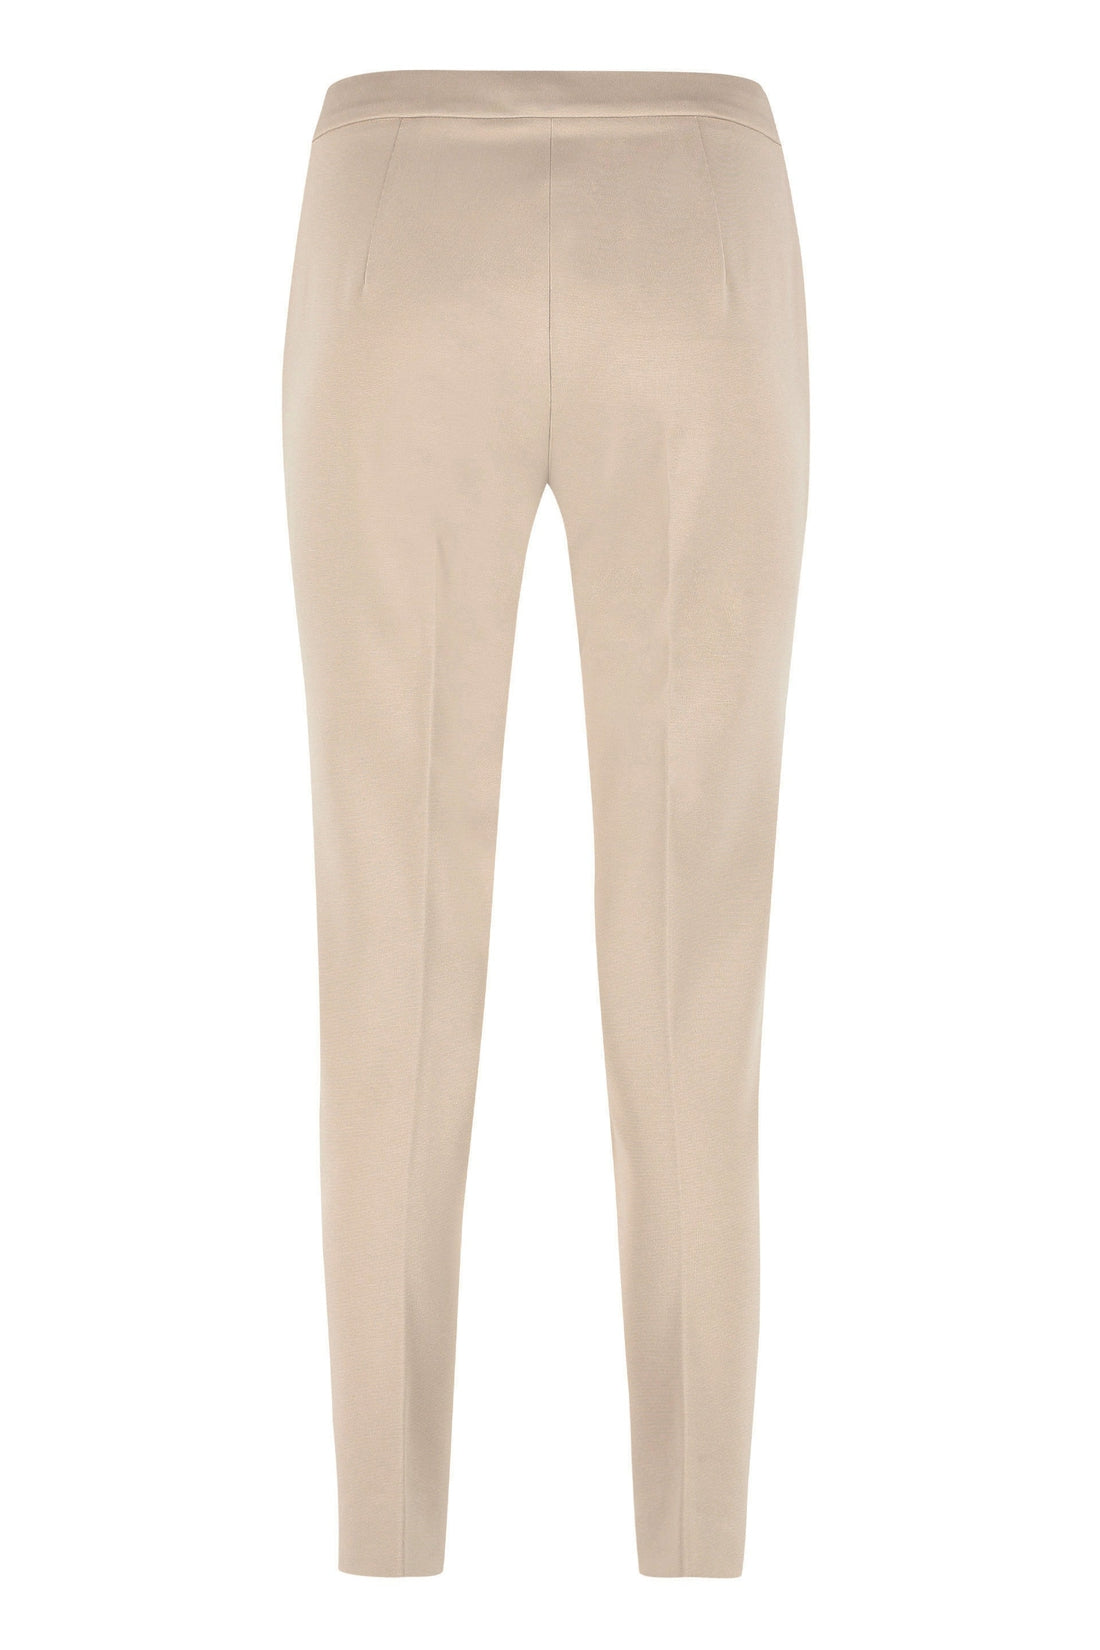 Max Mara-OUTLET-SALE-Pegno tailored trousers-ARCHIVIST